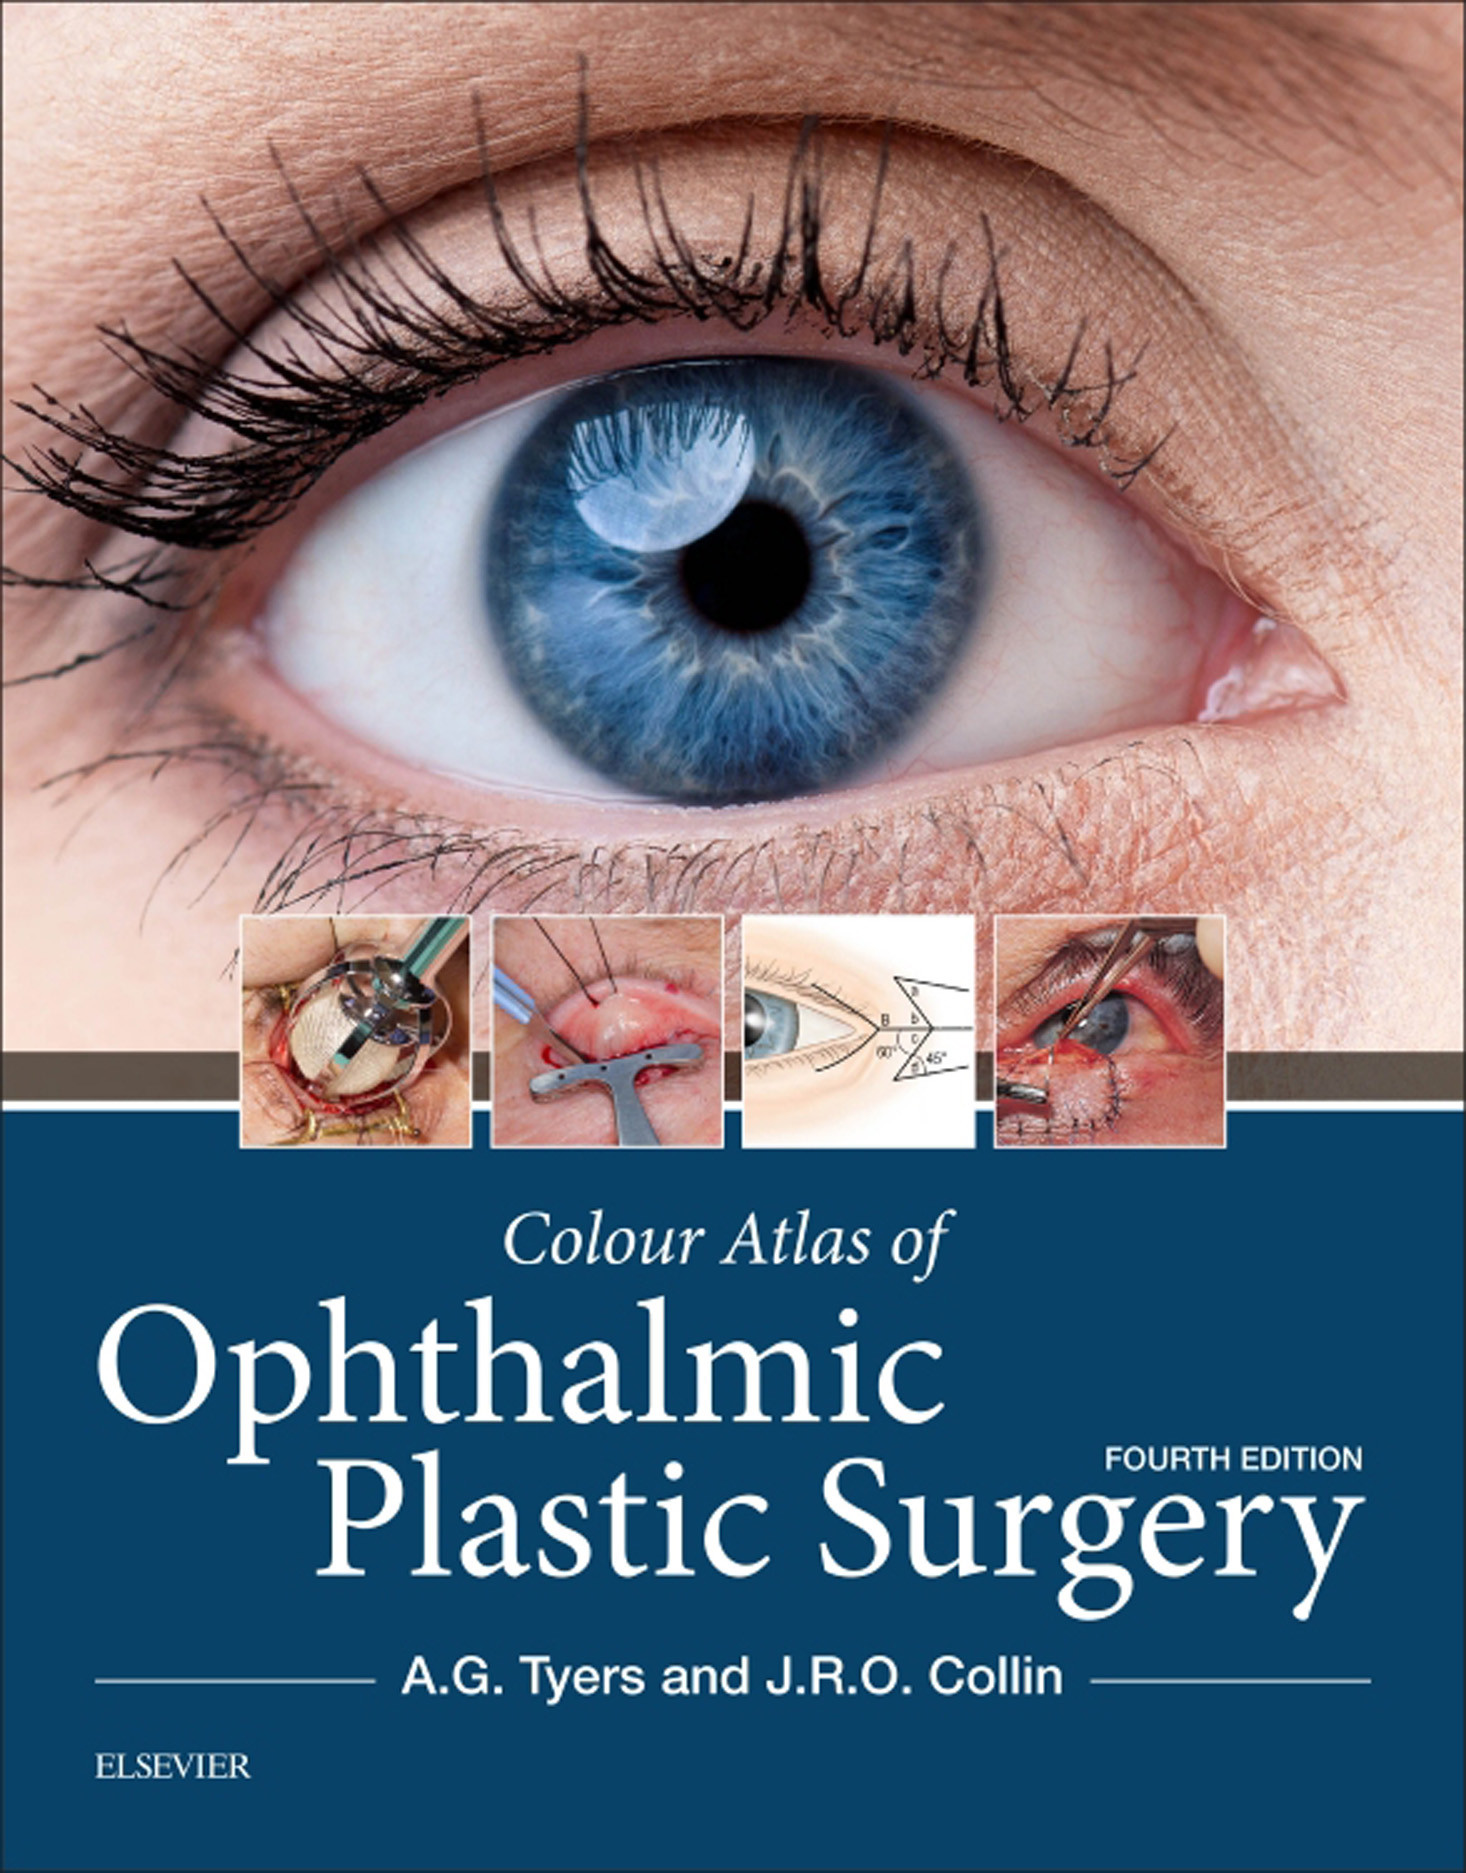 Colour Atlas of Ophthalmic Plastic Surgery E-Book